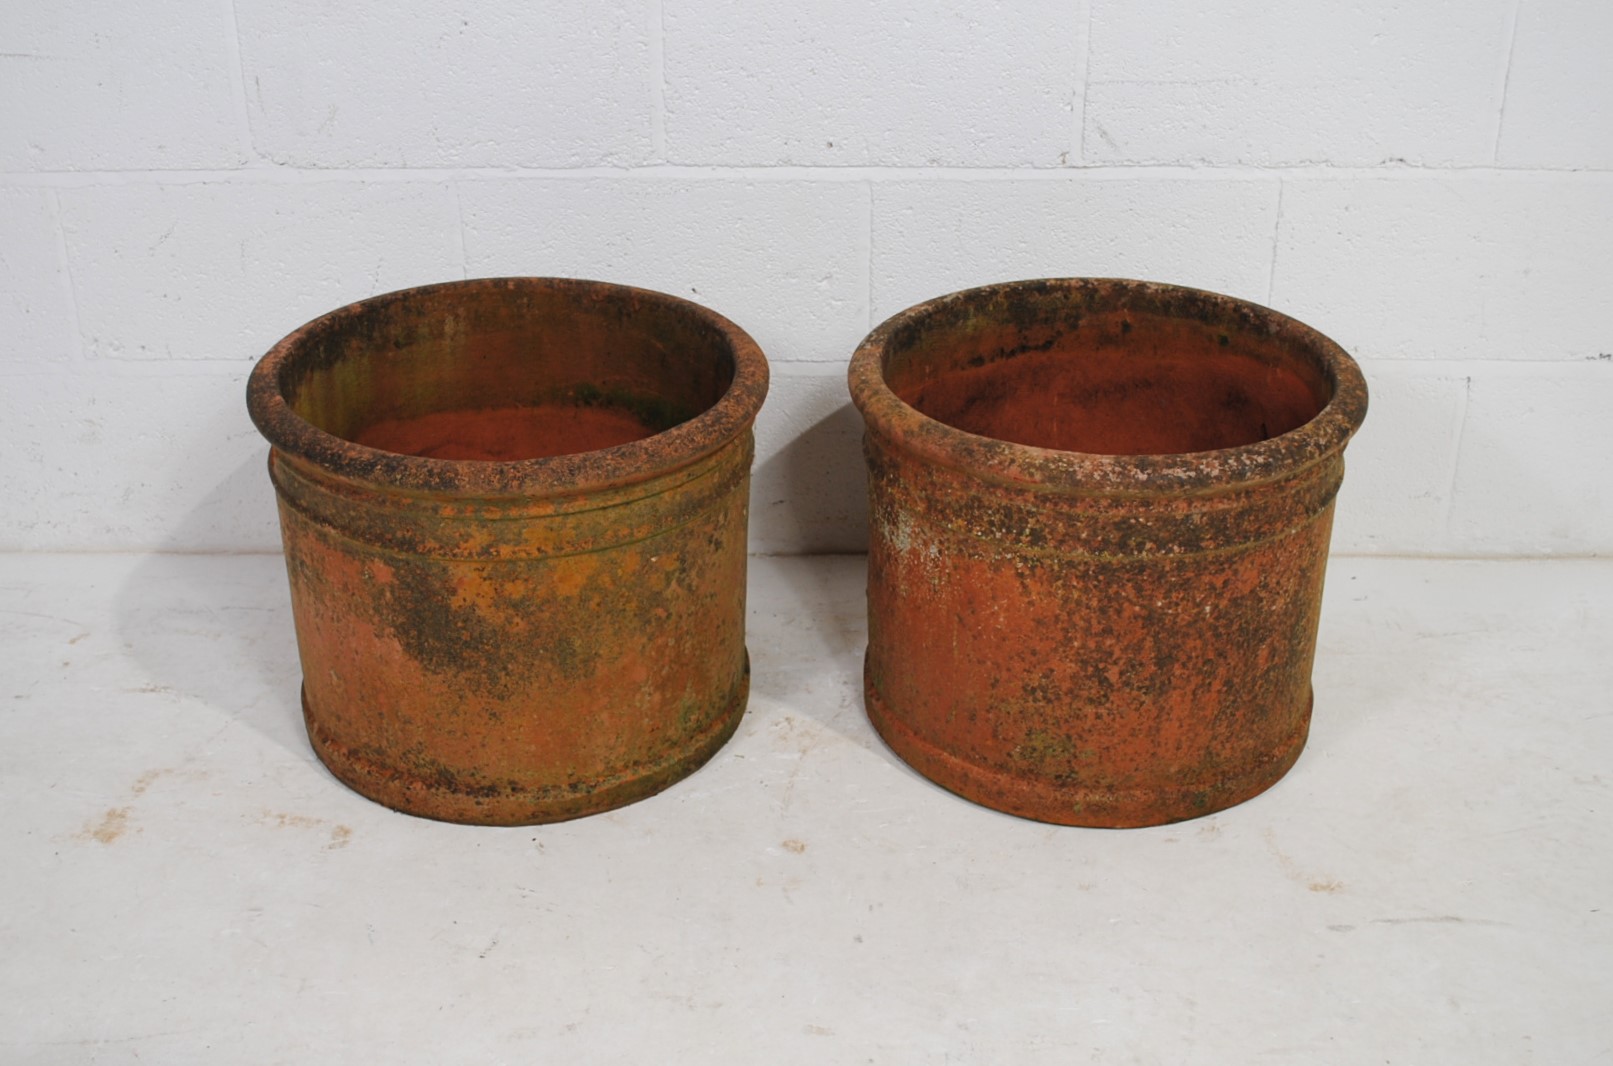 A pair of large weathered terracotta garden pots of cylindrical form - diameter 50cm, height 39cm